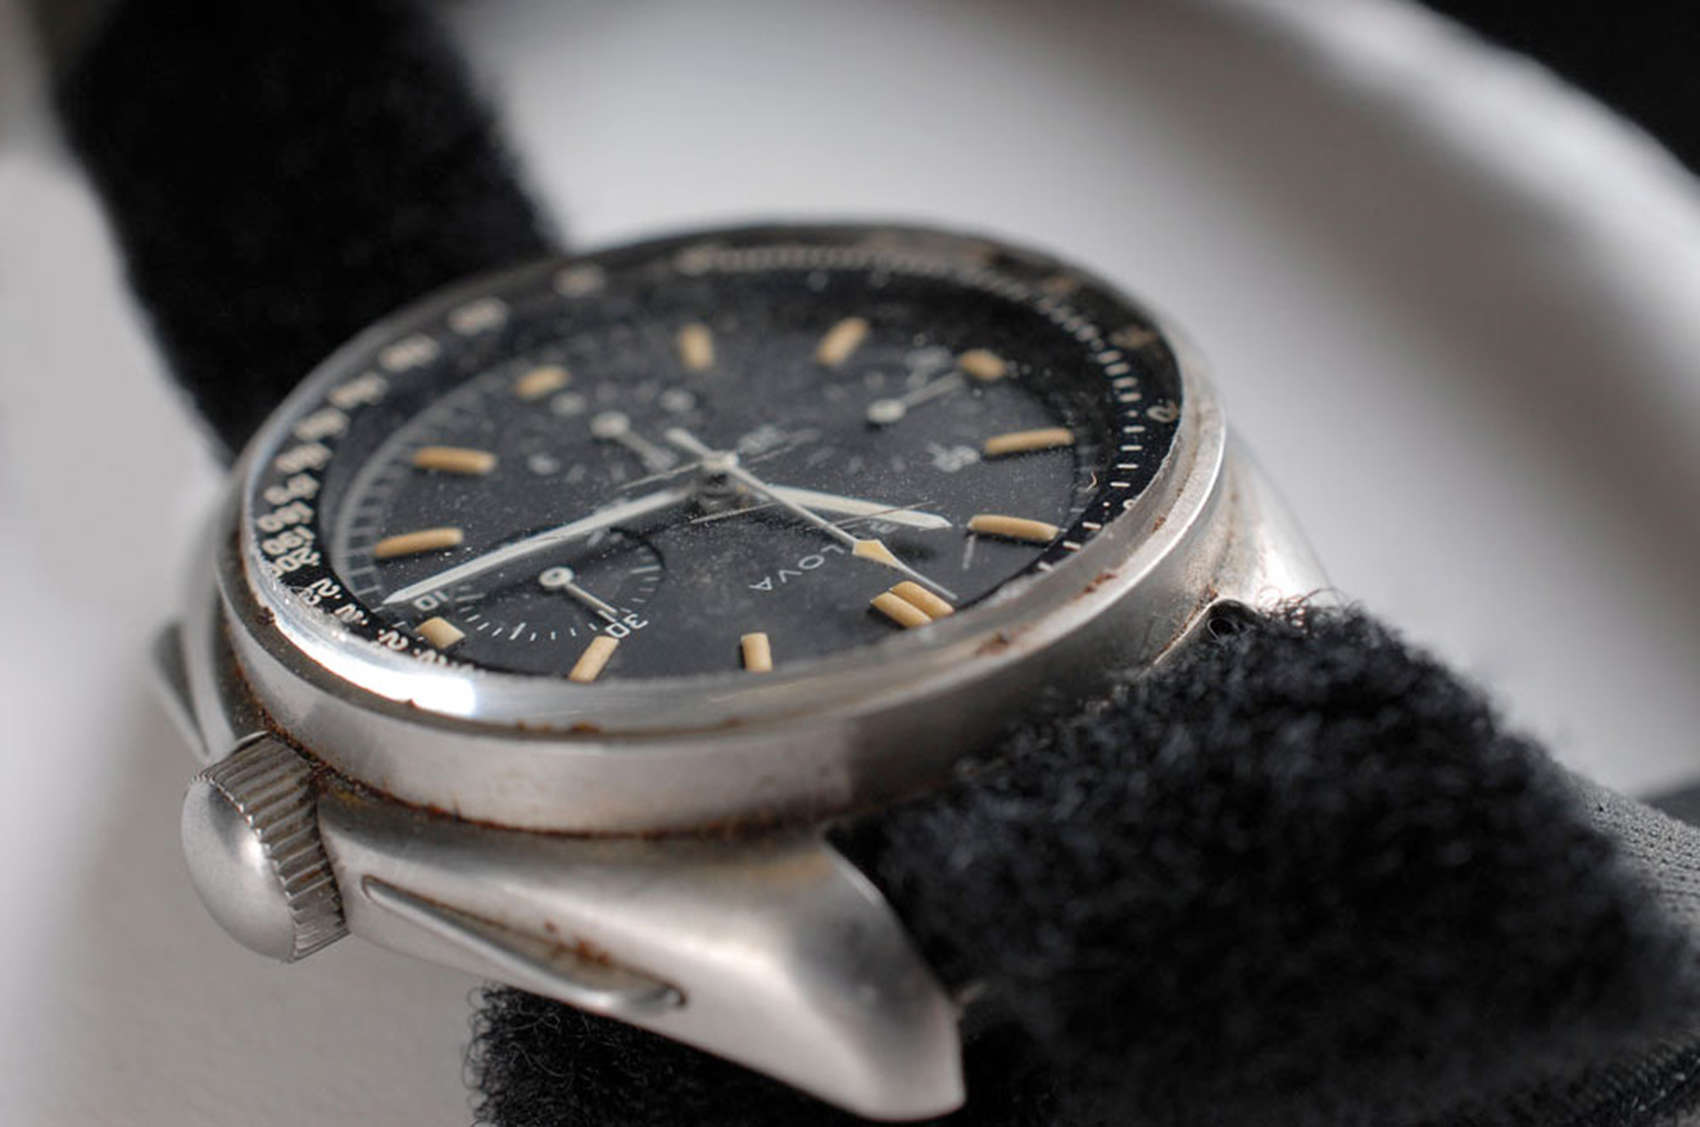 This Bulova watch worn by Apollo 15 commander David Scott will open at auction at $50,000.